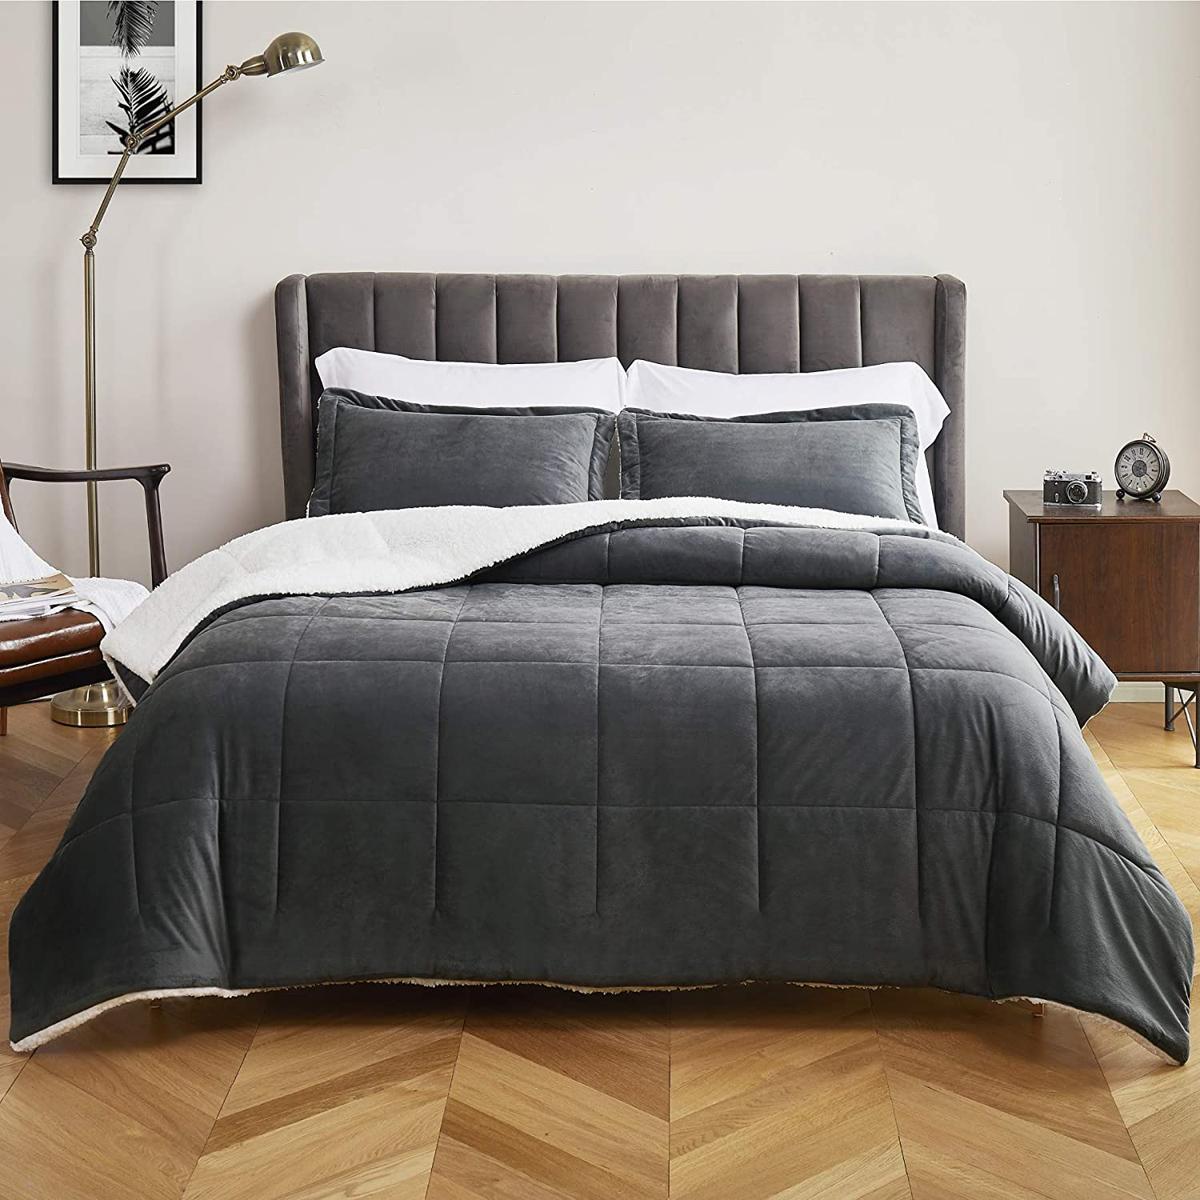 Bedsure Sherpa Micromink Grey Comforter Queen Set for $20.99 Shipped